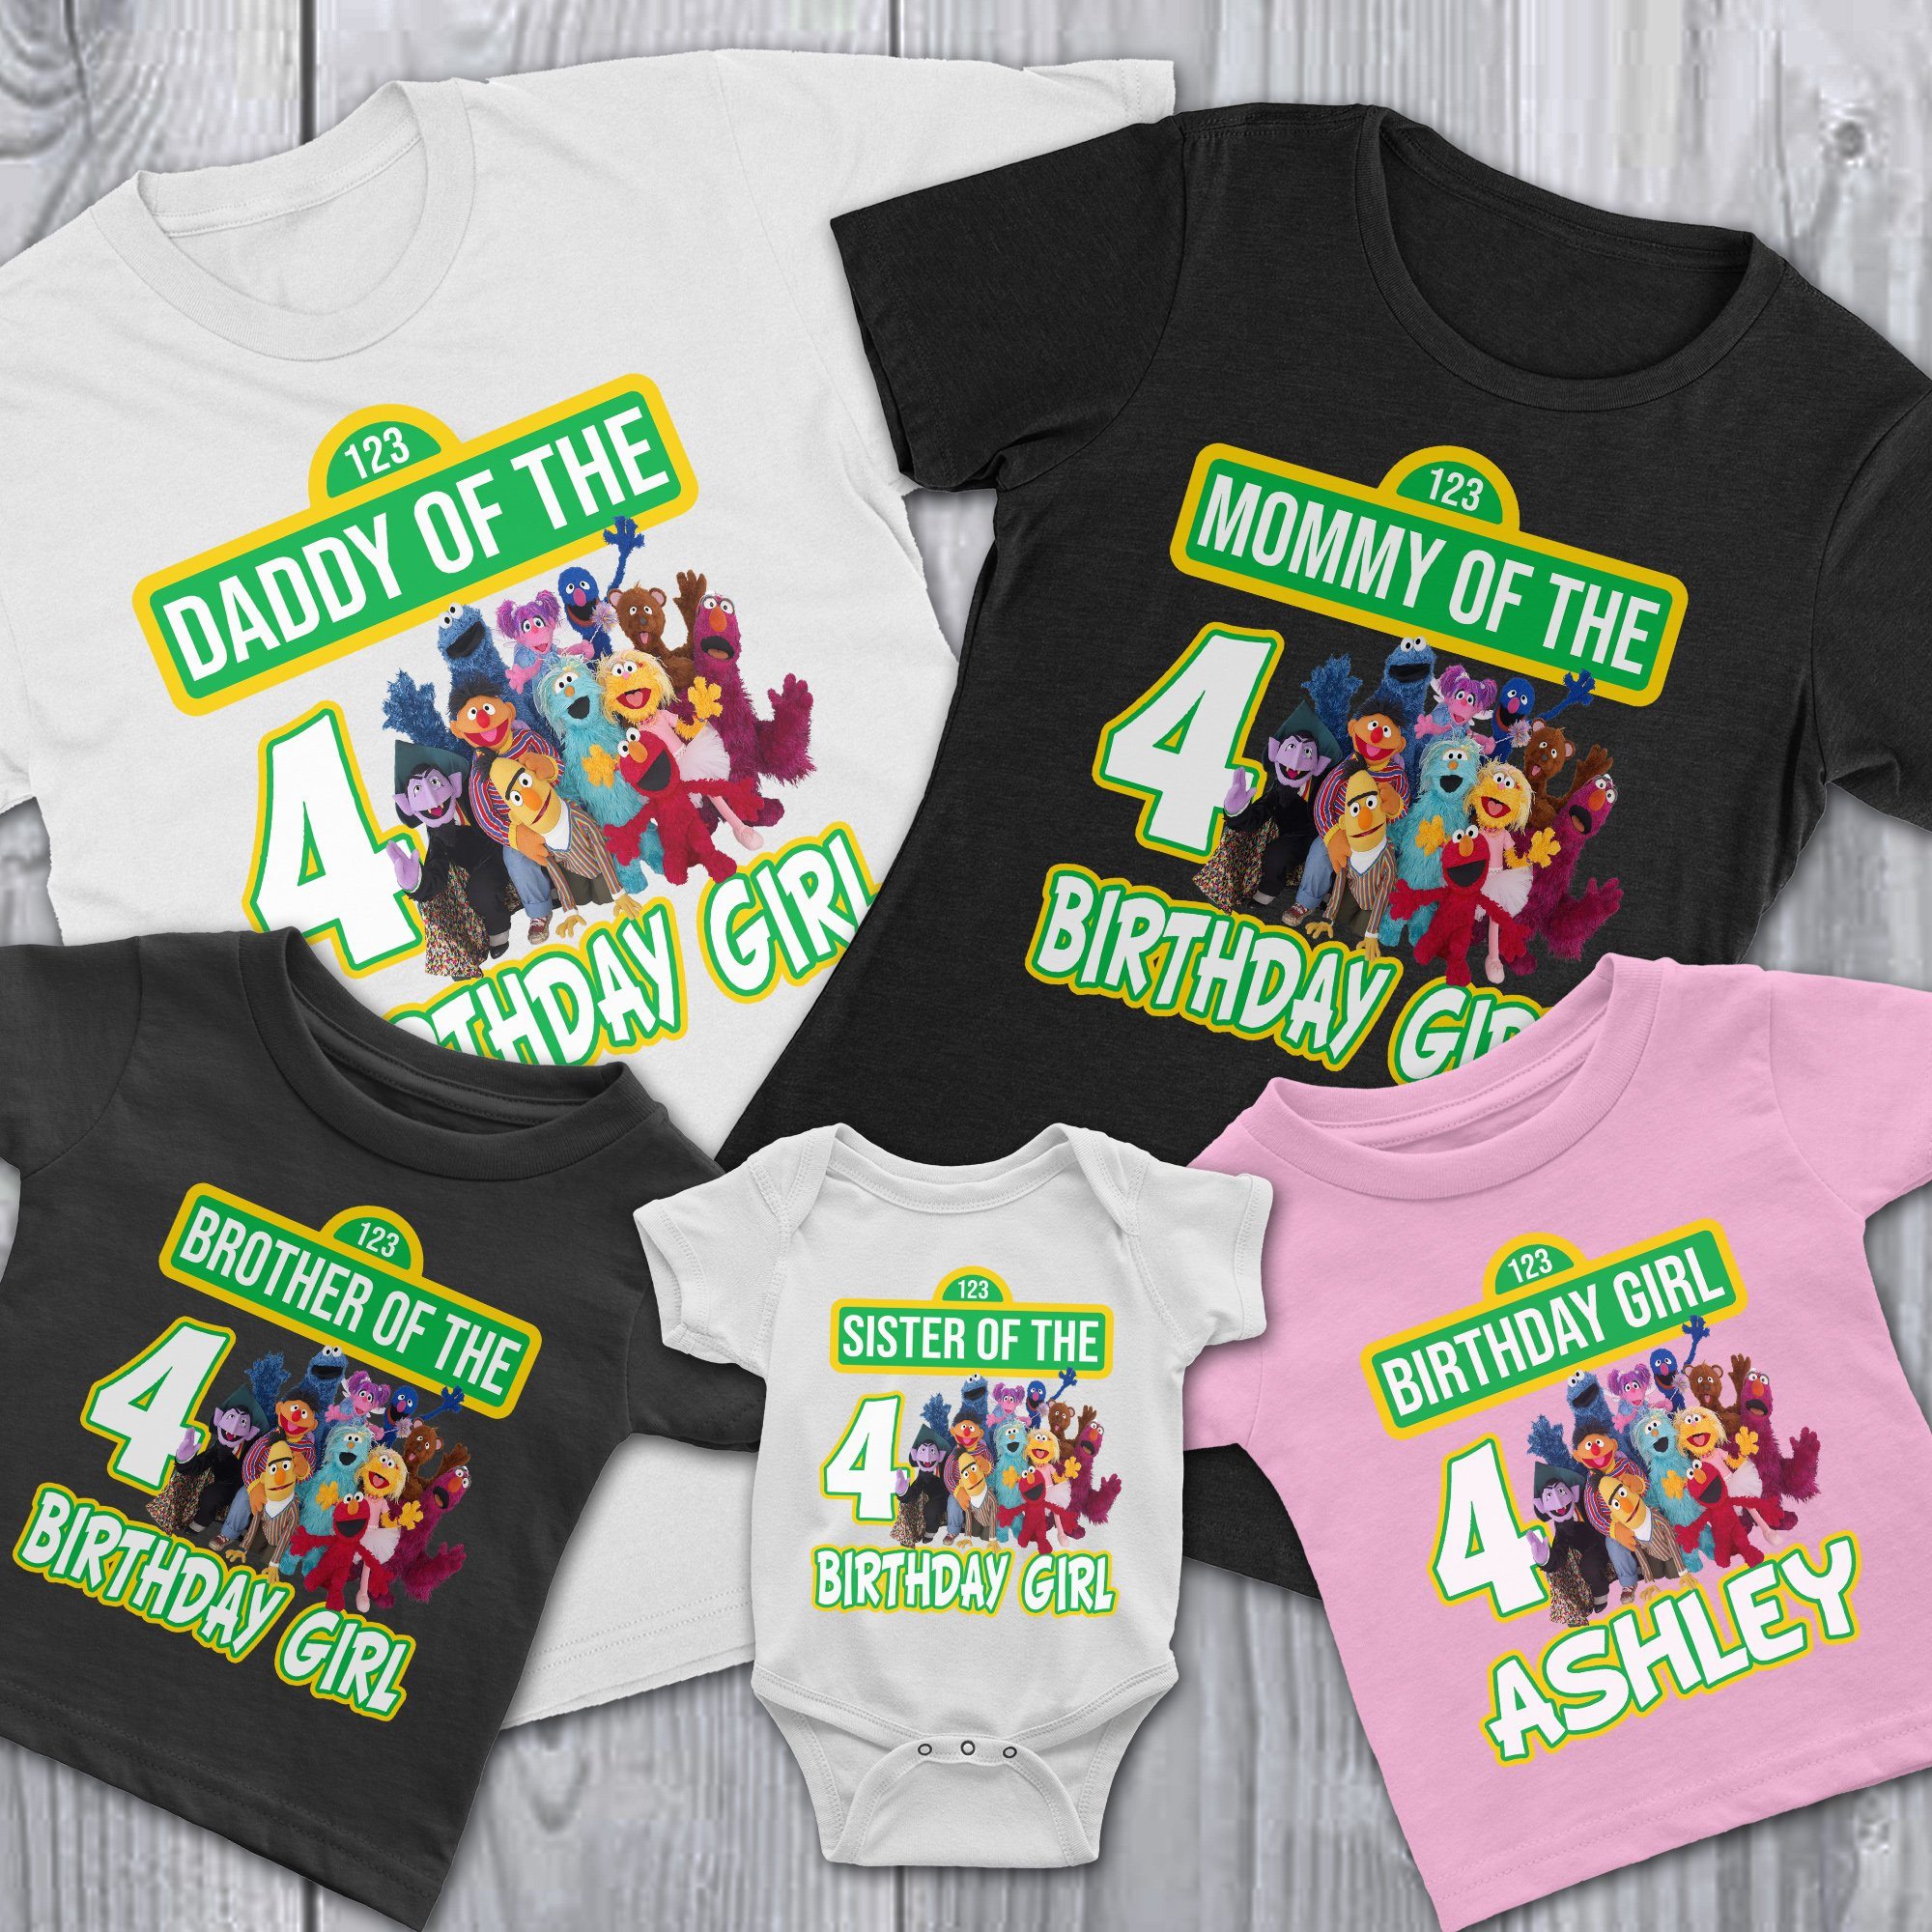 Personalized Ninja Turtles Birthday Shirt Youth Toddler and Adult Sizes Available Black 3T